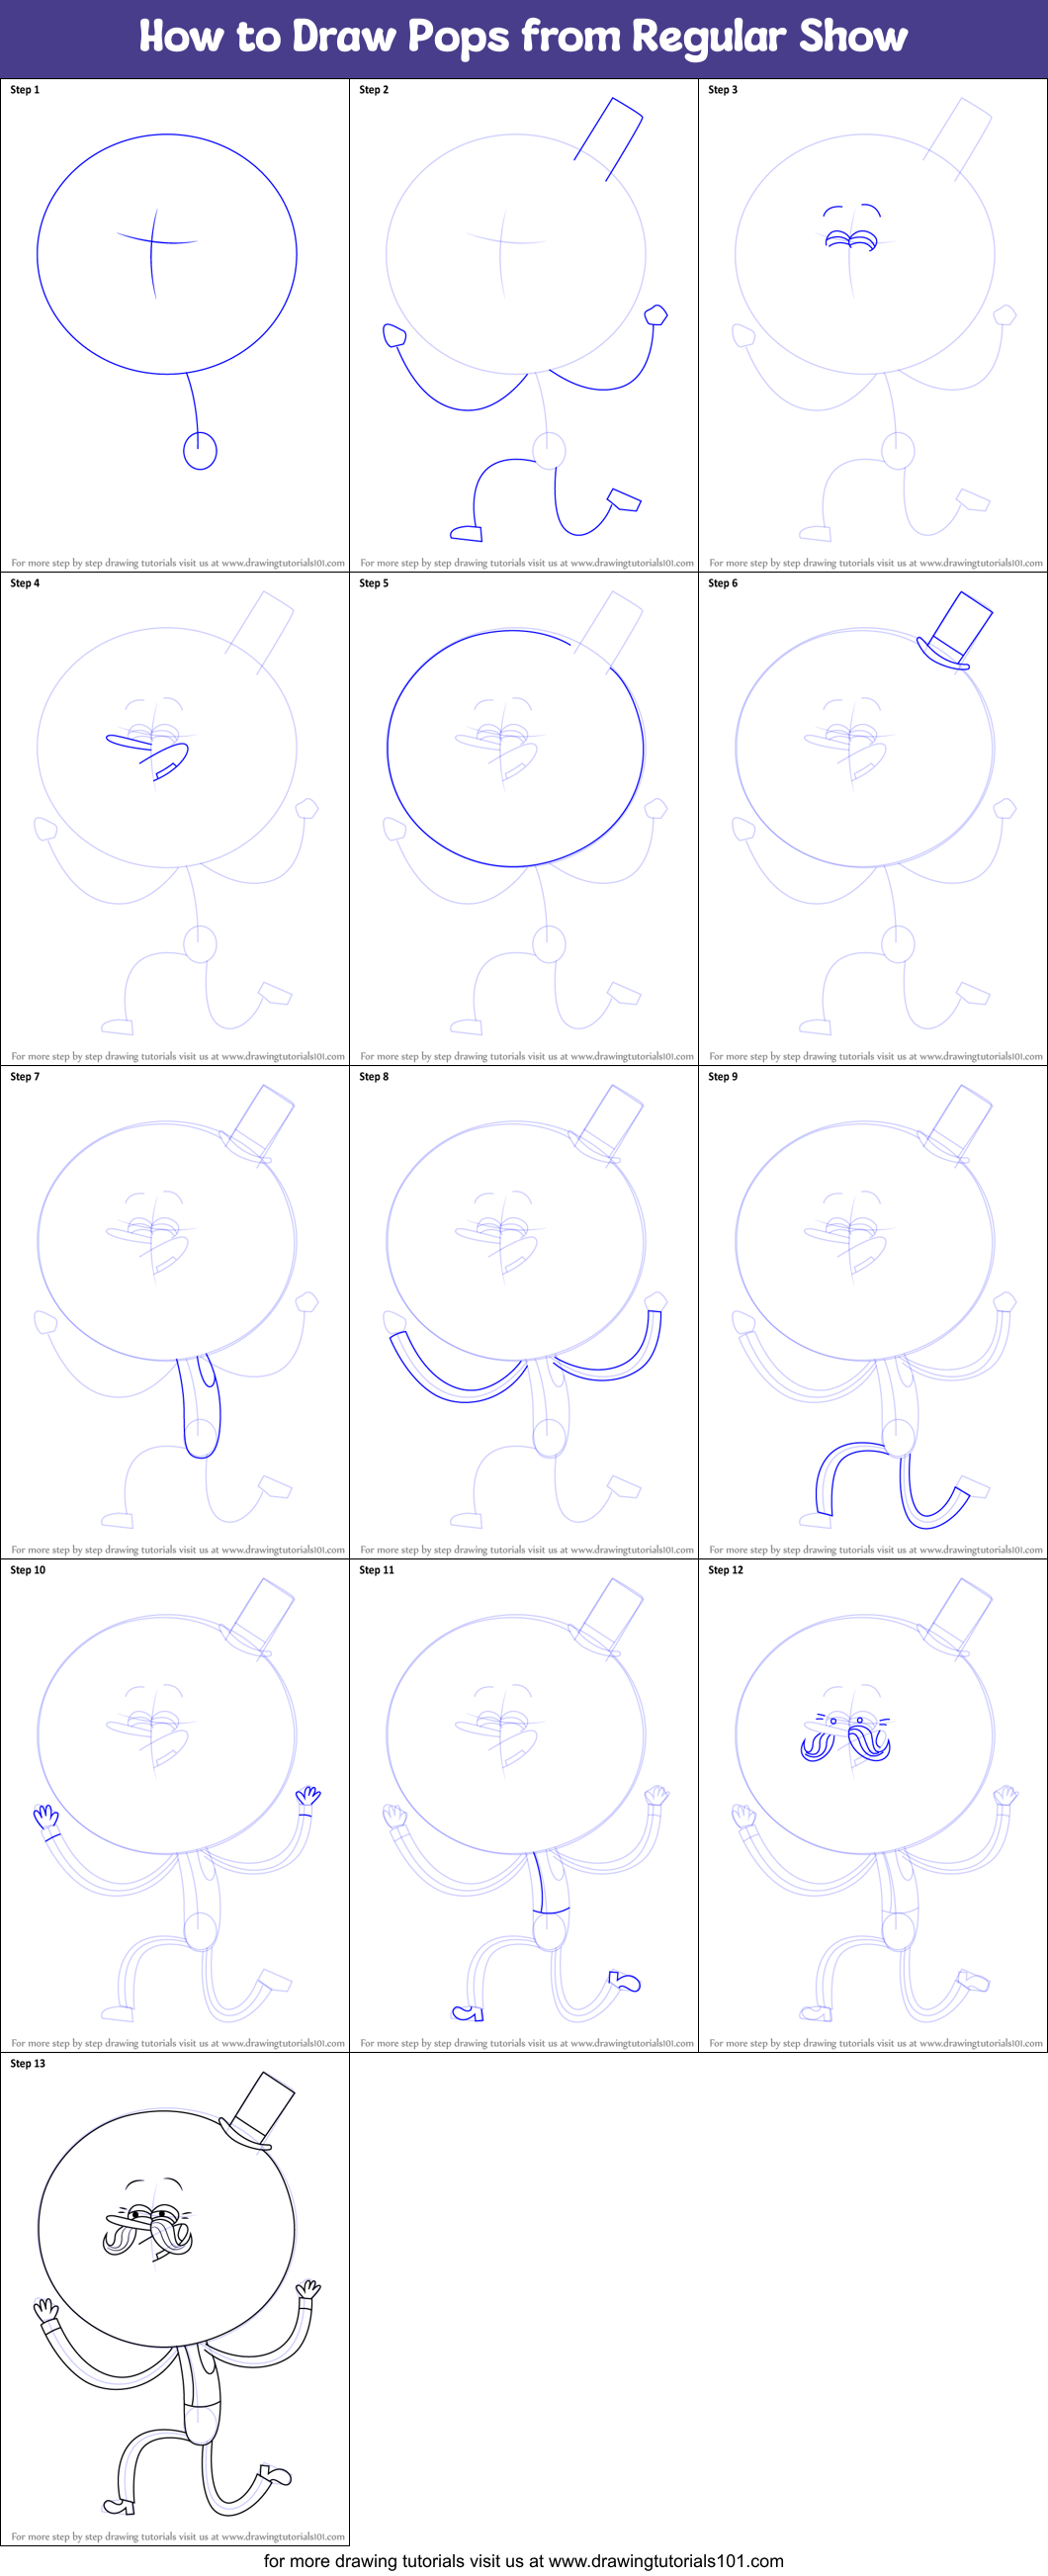 how to draw regular show pops